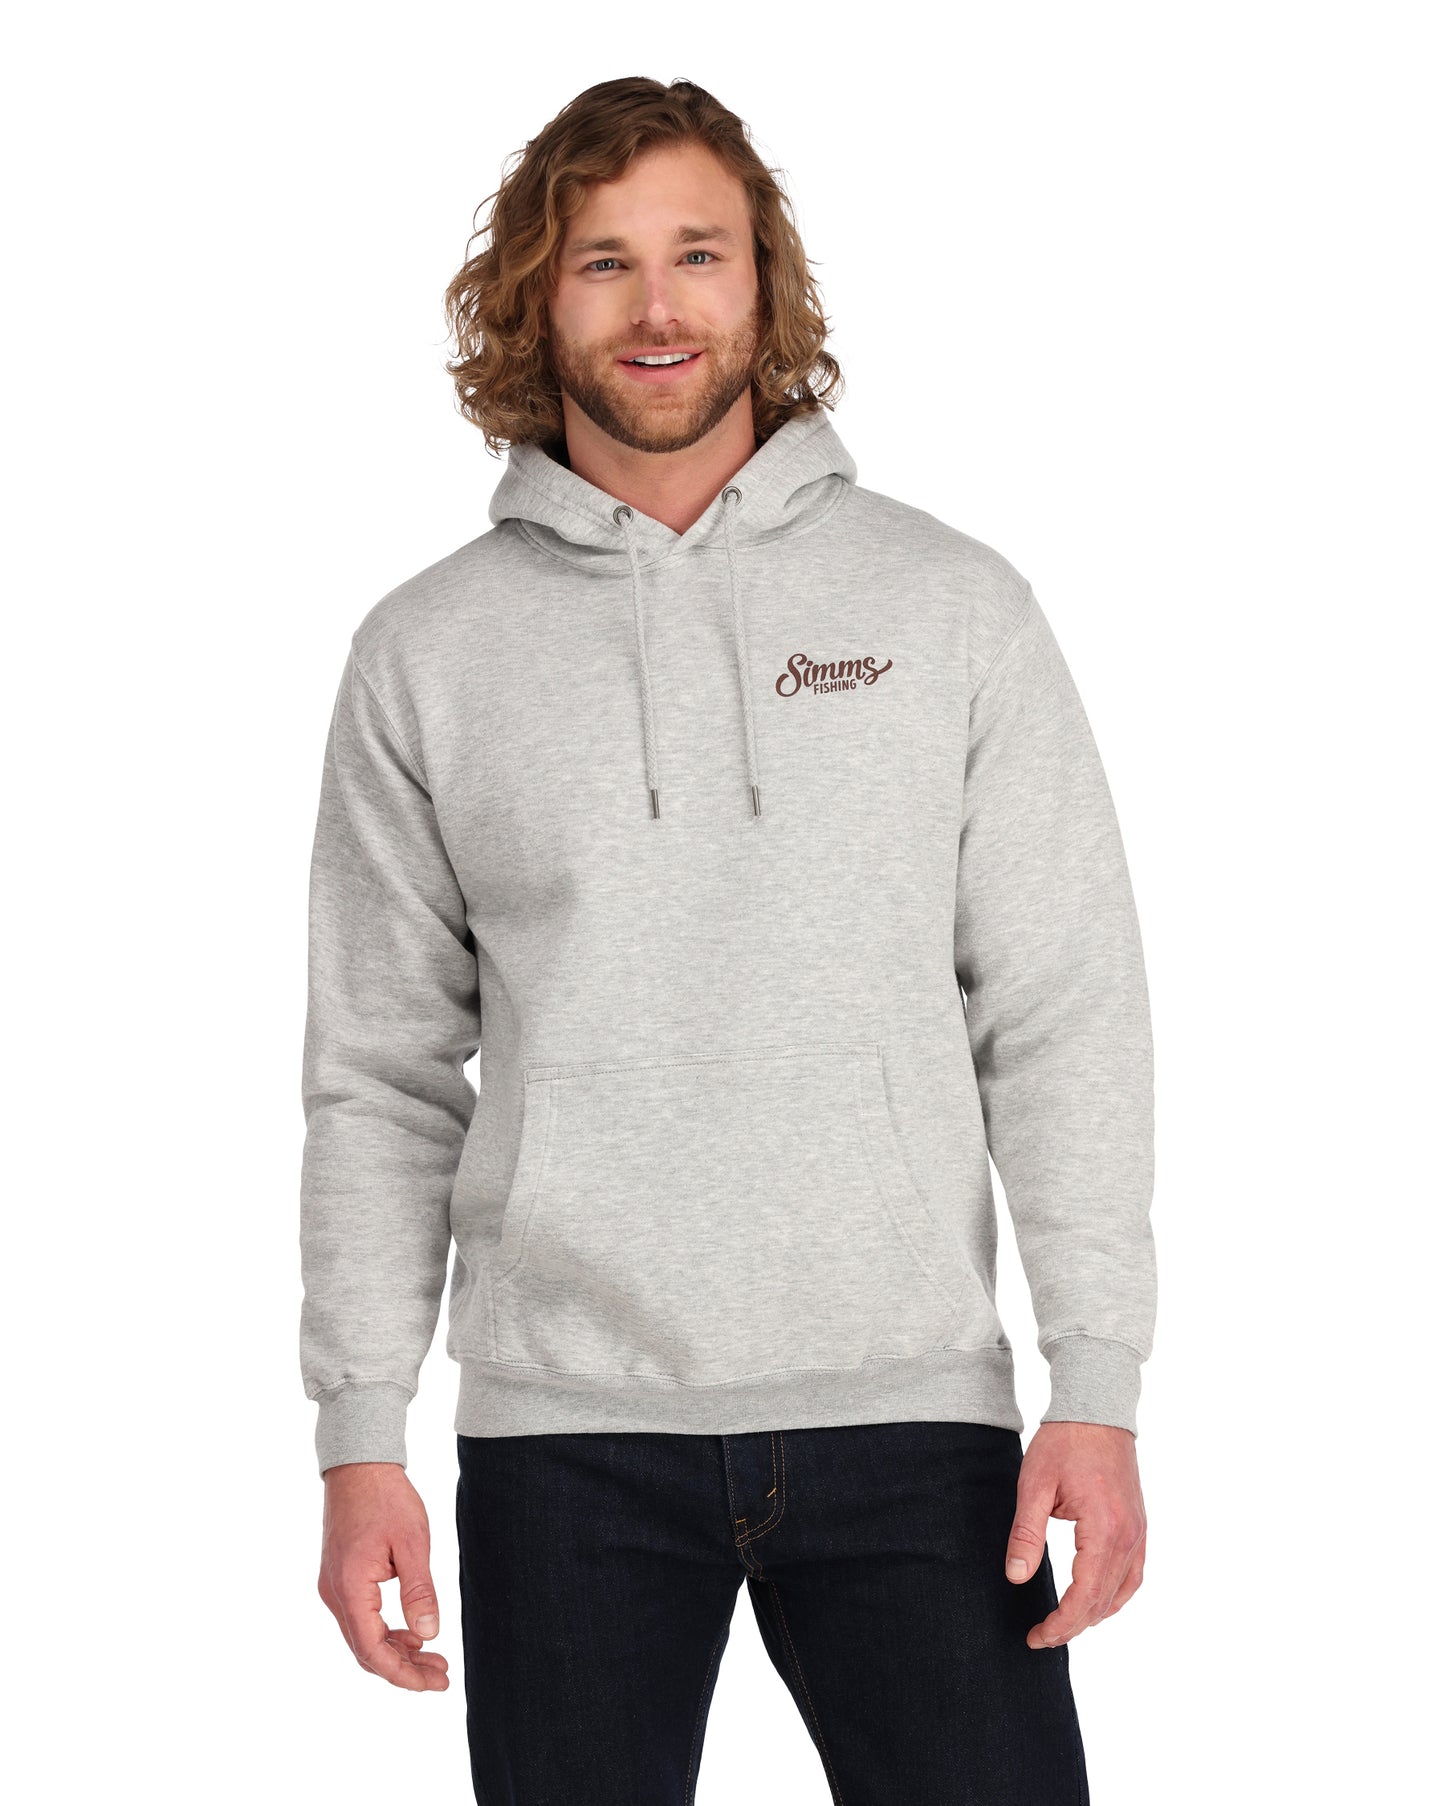 13627-067-simms-two-tone-hoody-model -rollover